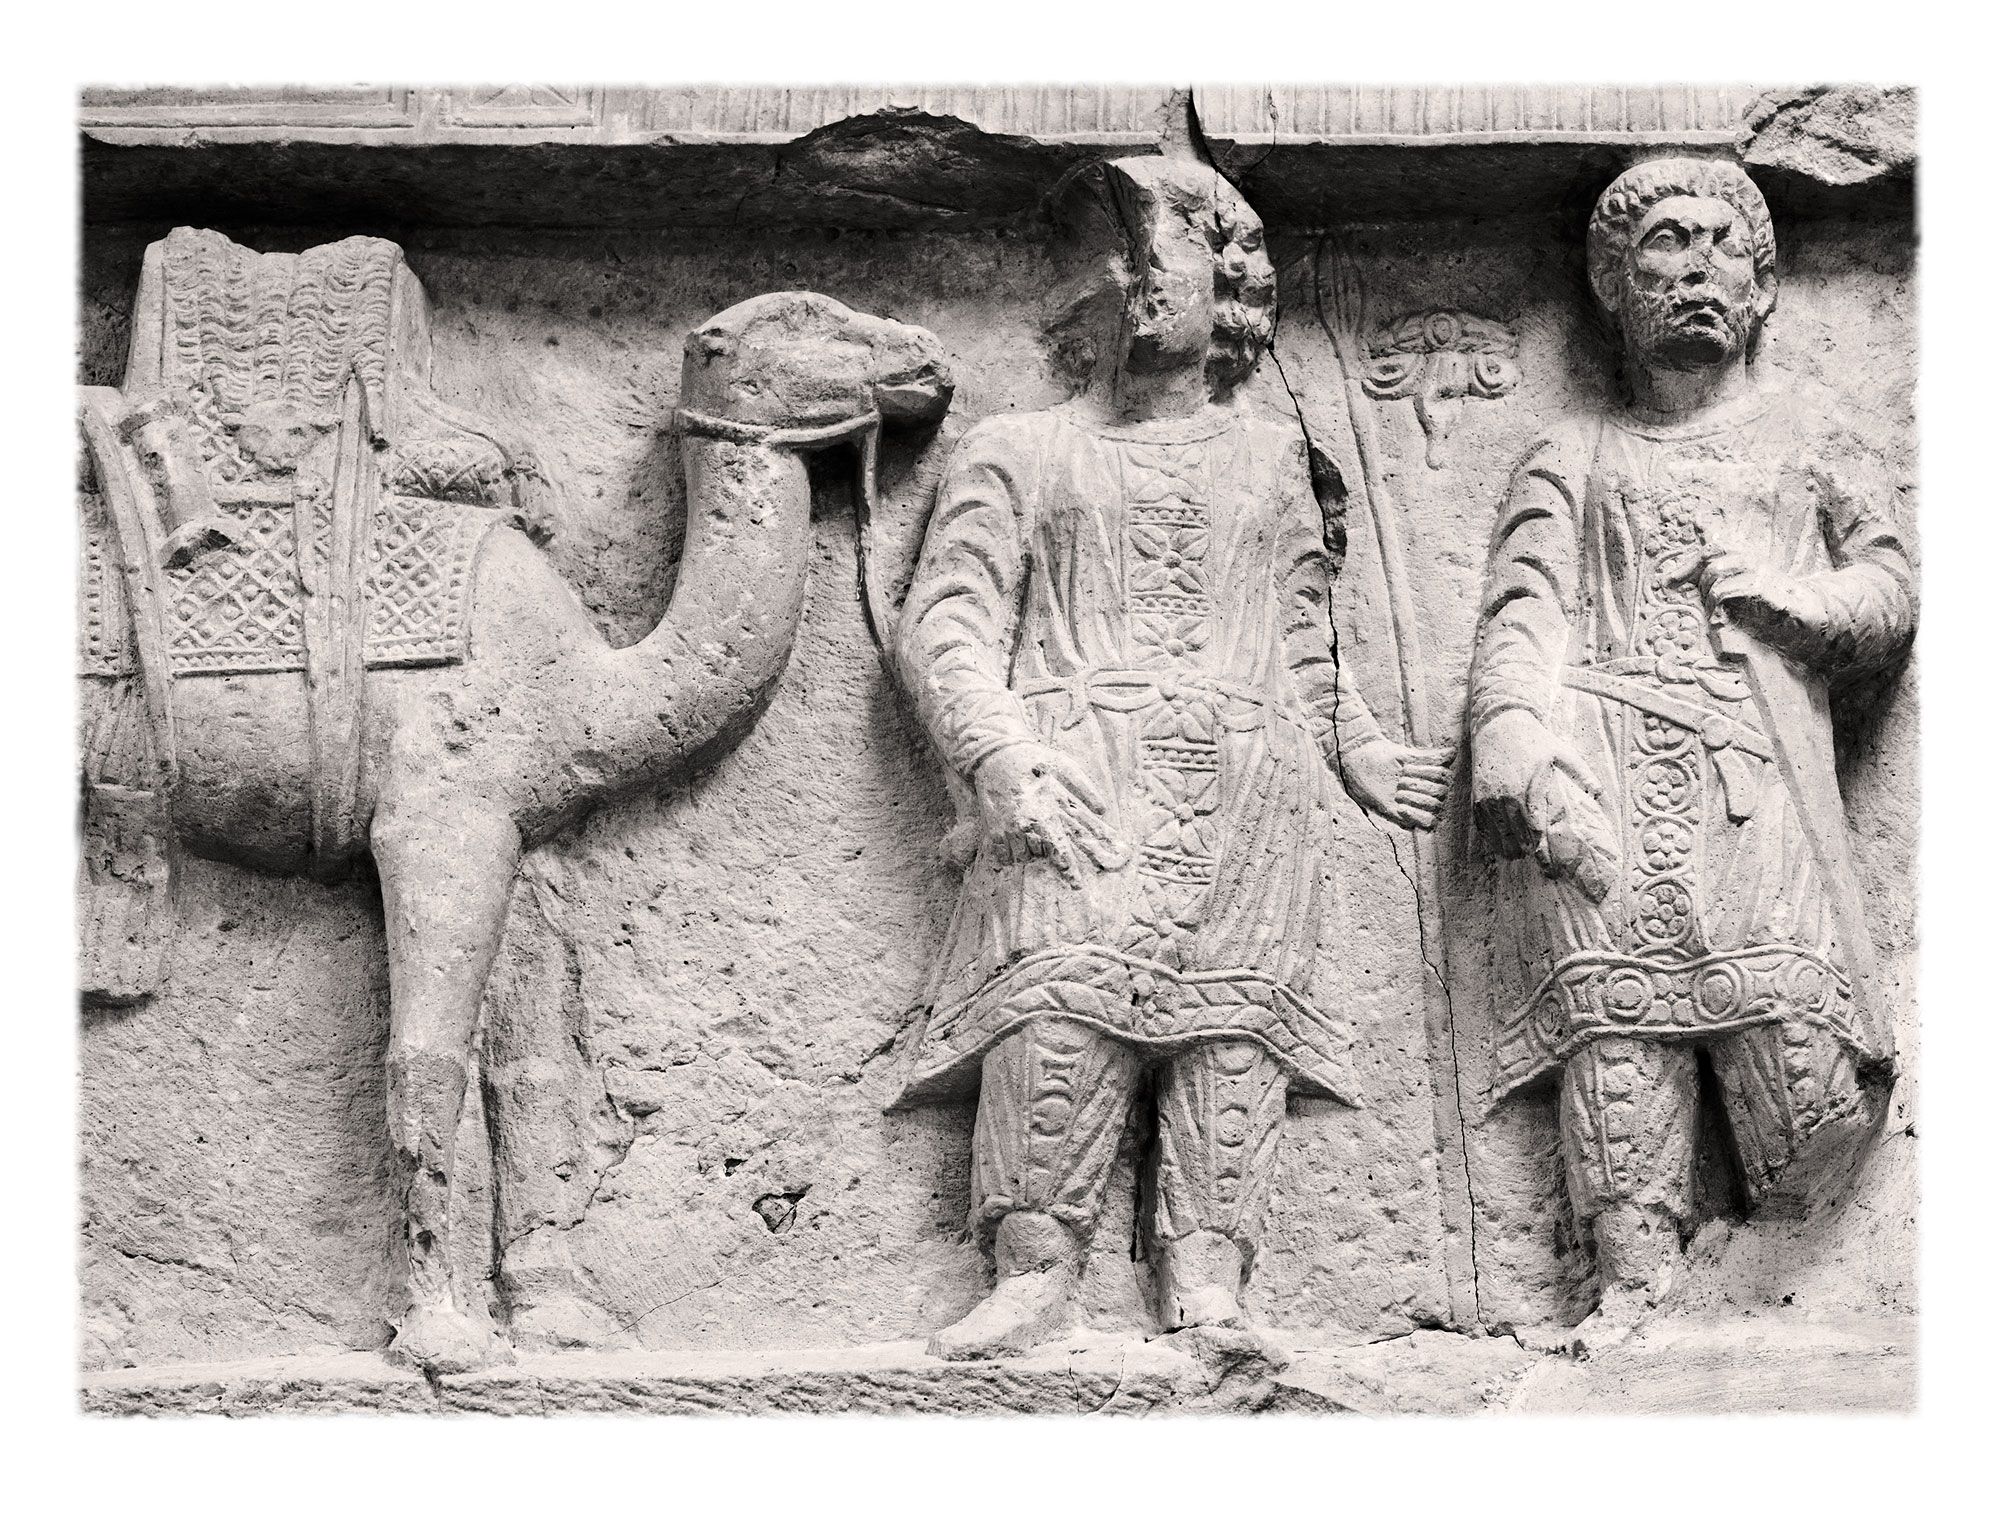 Palmyra earned its wealth through caravan trade between the Euphrates River (hence Persia, India and China) and the Mediterranean West (specifically, Egypt, Rome and, later, Byzantium). Note the Parthian dress of the two men.